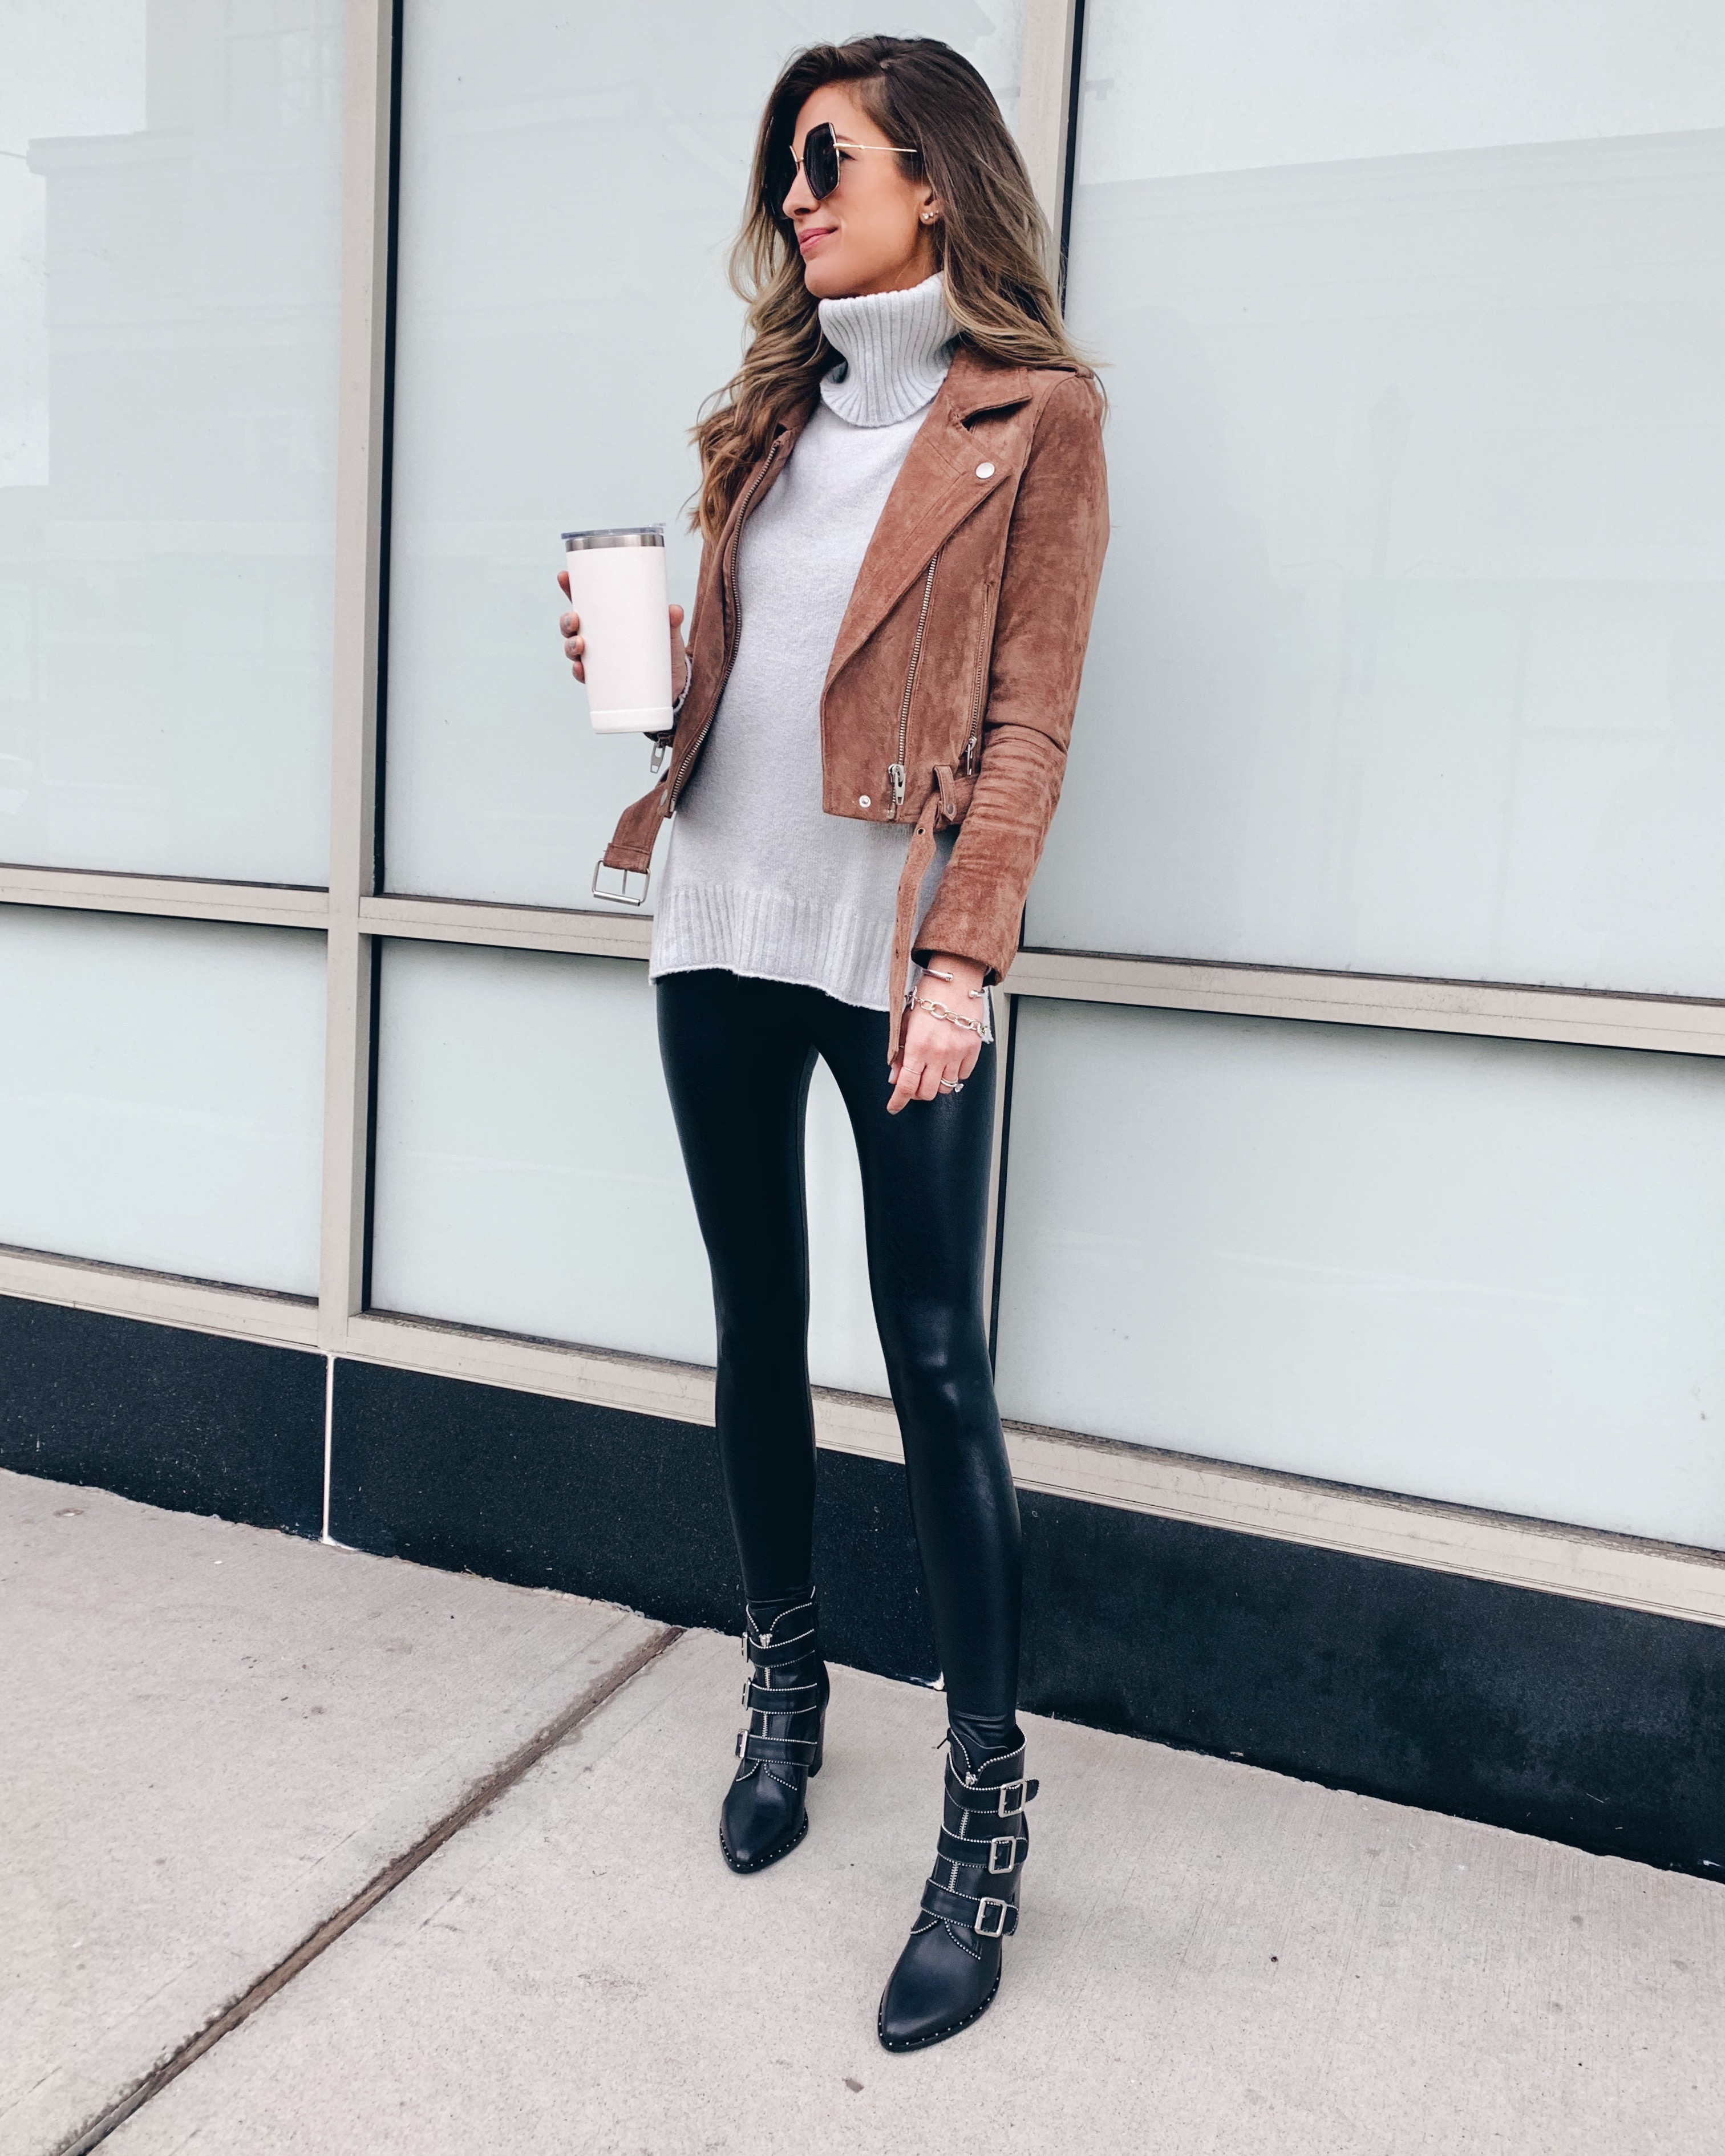 How to Wear Leather like a Street Style Blogger | Black leather leggings  outfit, Outfits with leggings, Leather leggings outfit night